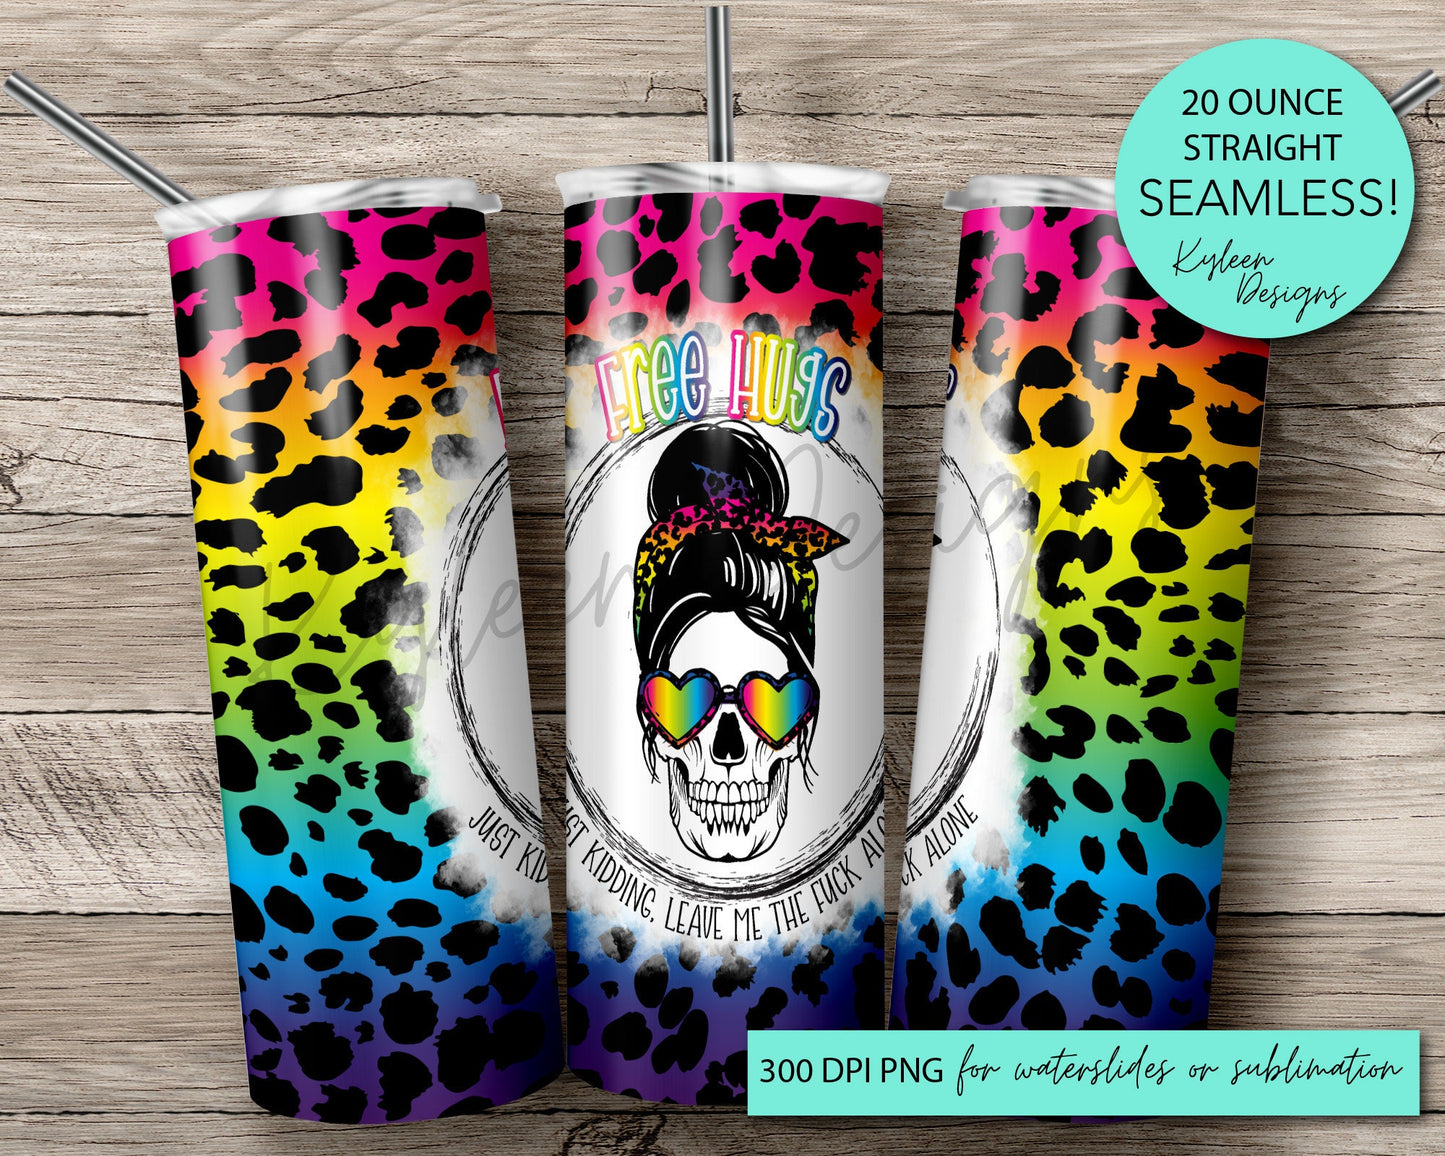 SEAMLESS free hugs messy bun skeleton 20 ounce tumbler wrap for sublimation, waterslide High res PNG digital file- Straight only